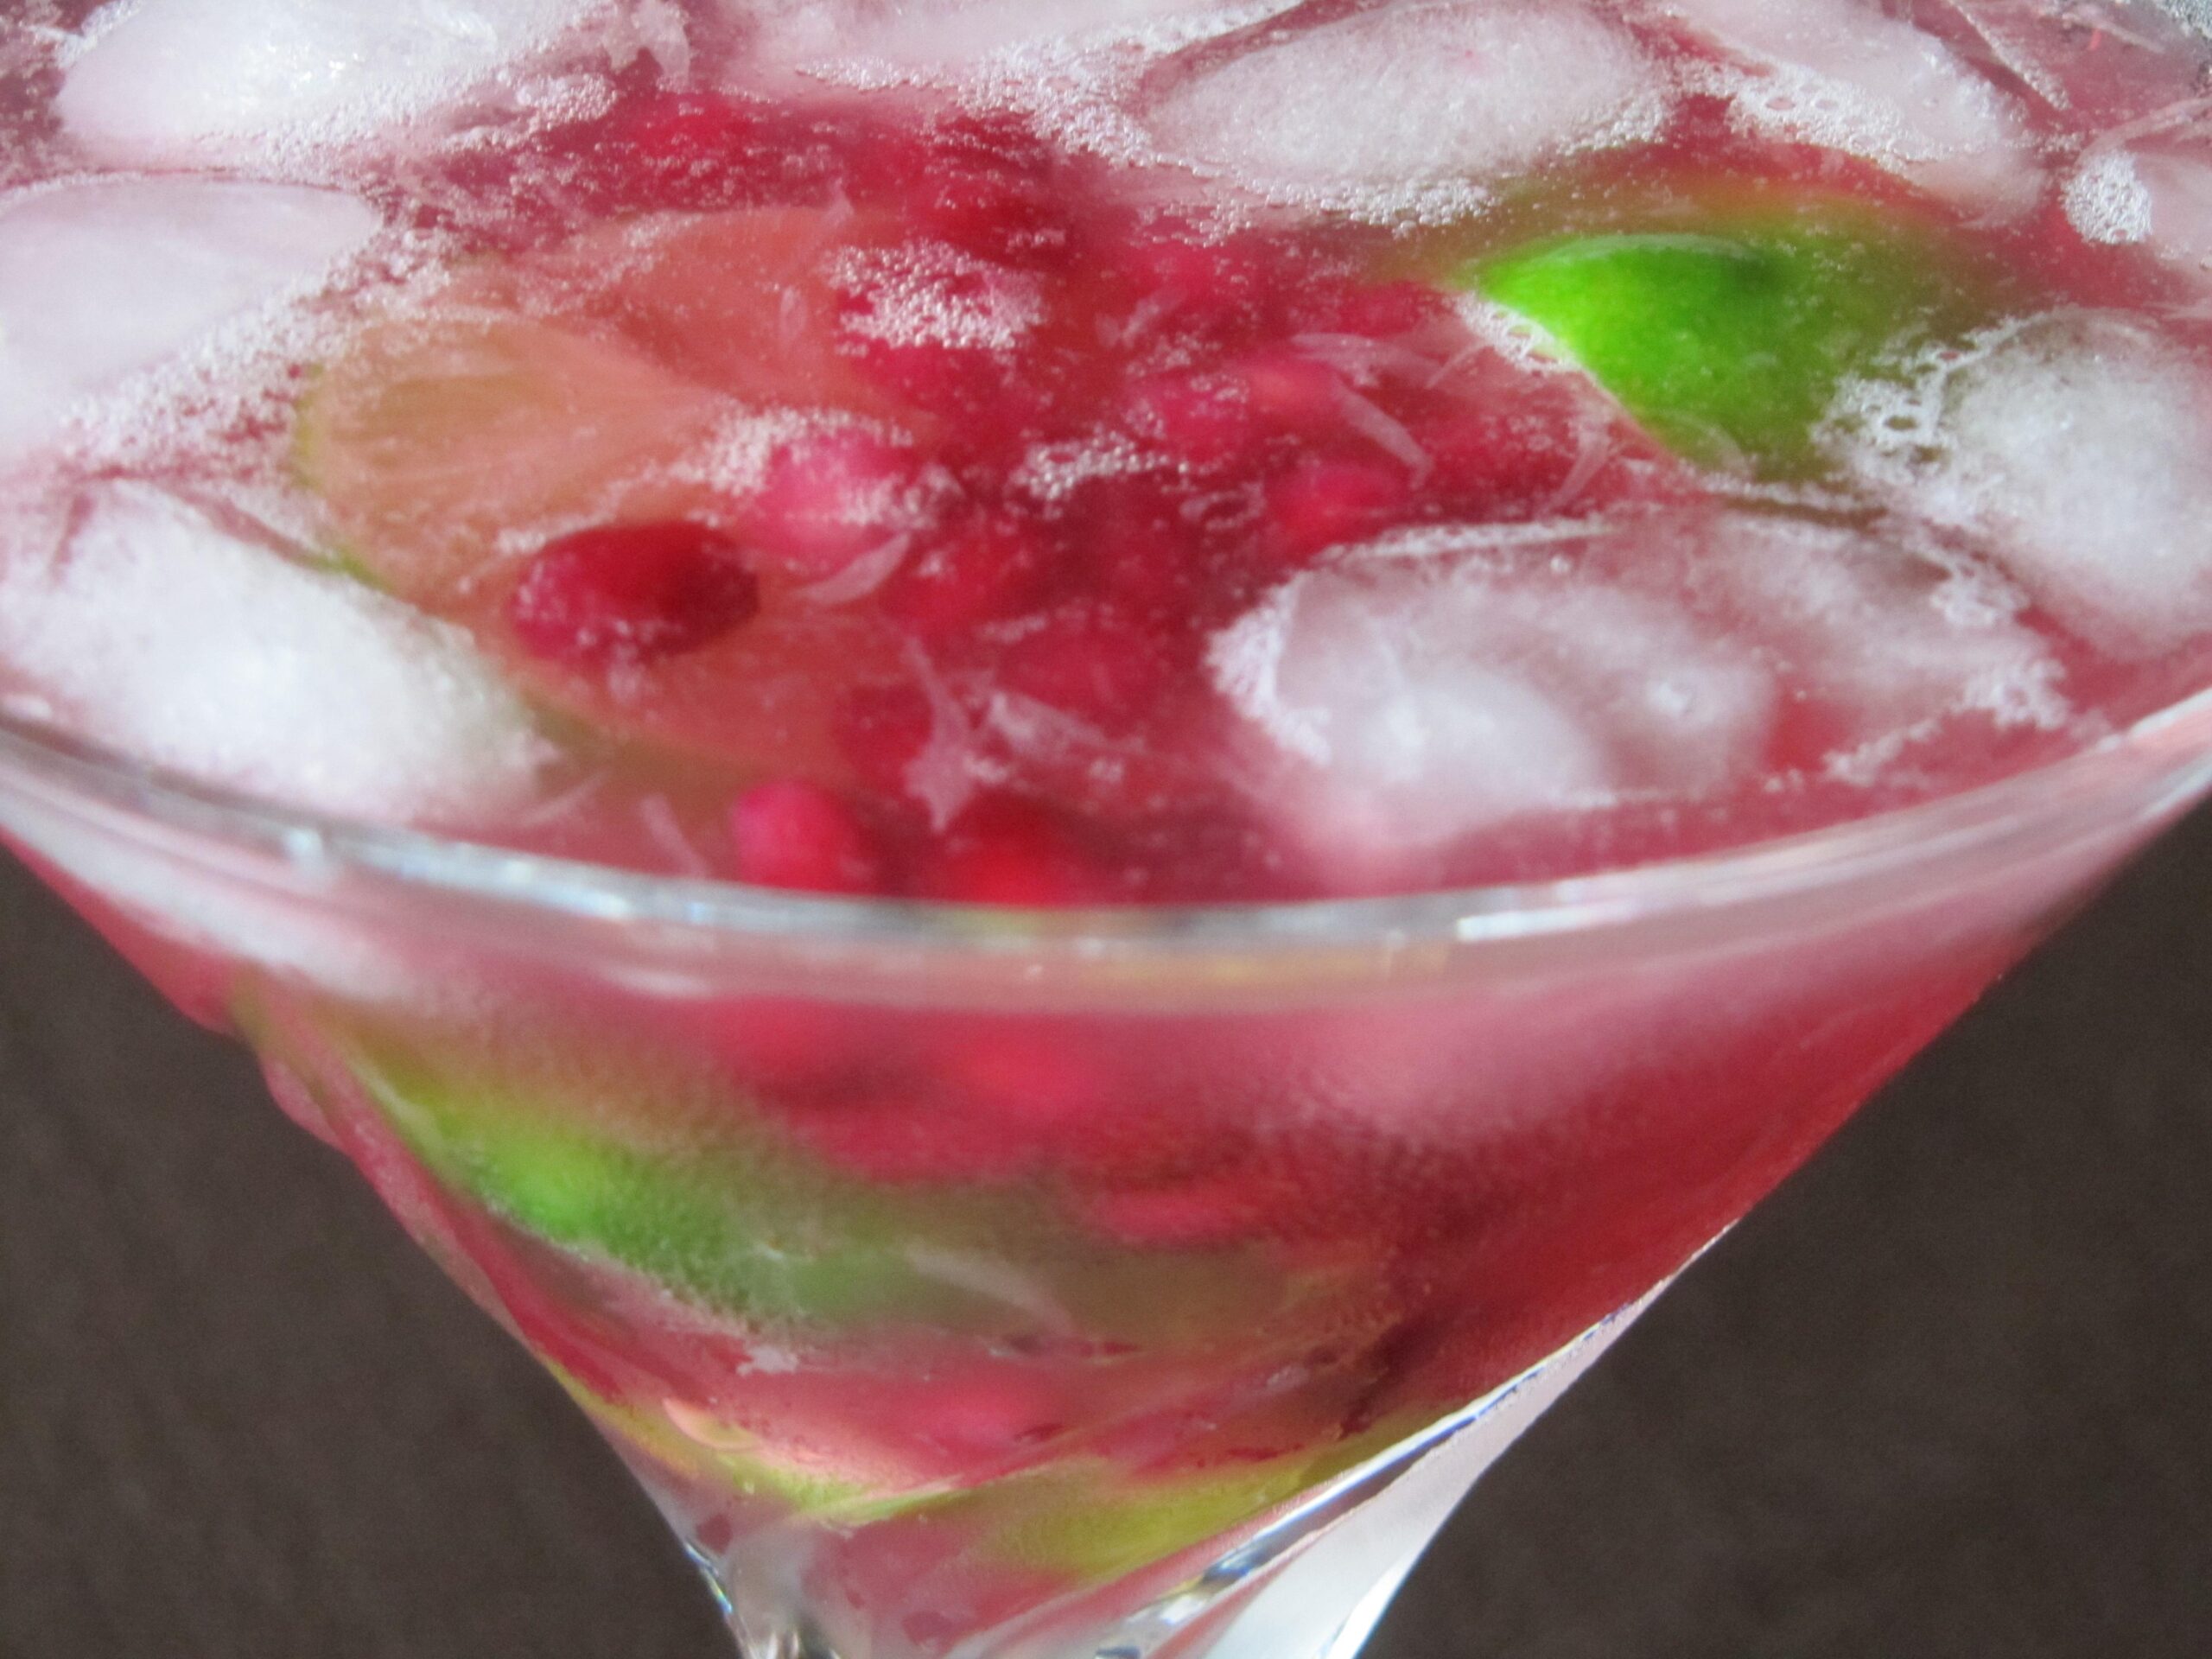  Shake things up with a Brazilian Martini!